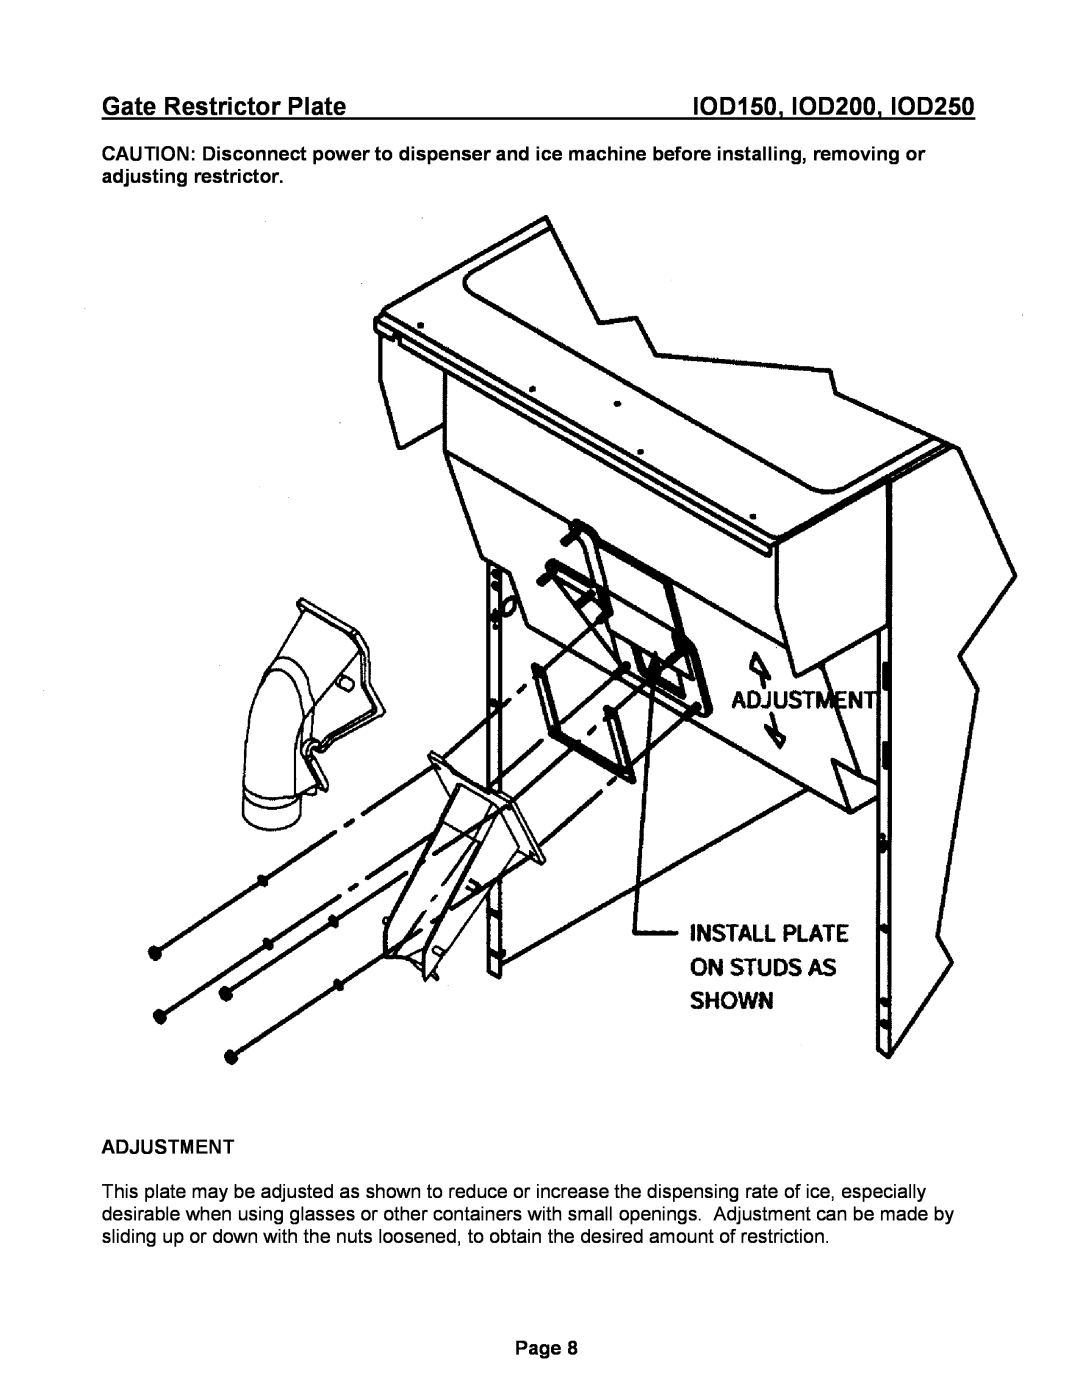 Ice-O-Matic installation manual Gate Restrictor Plate, Adjustment, IOD150, IOD200, IOD250, Page 